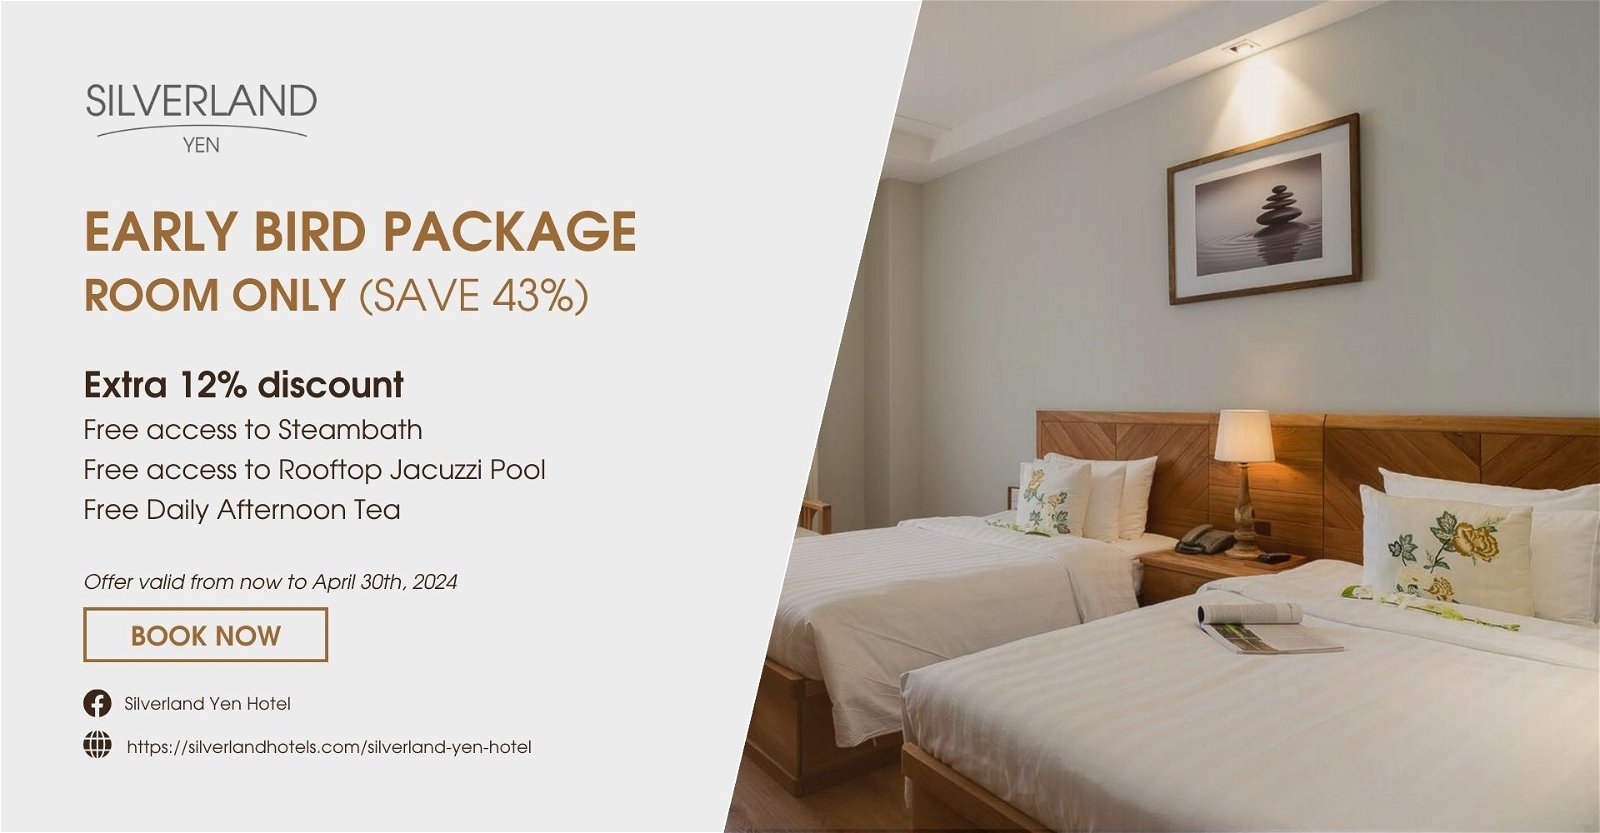 SILVERLAND YEN – EARLY BIRD – ROOM ONLY (SAVE 43%)